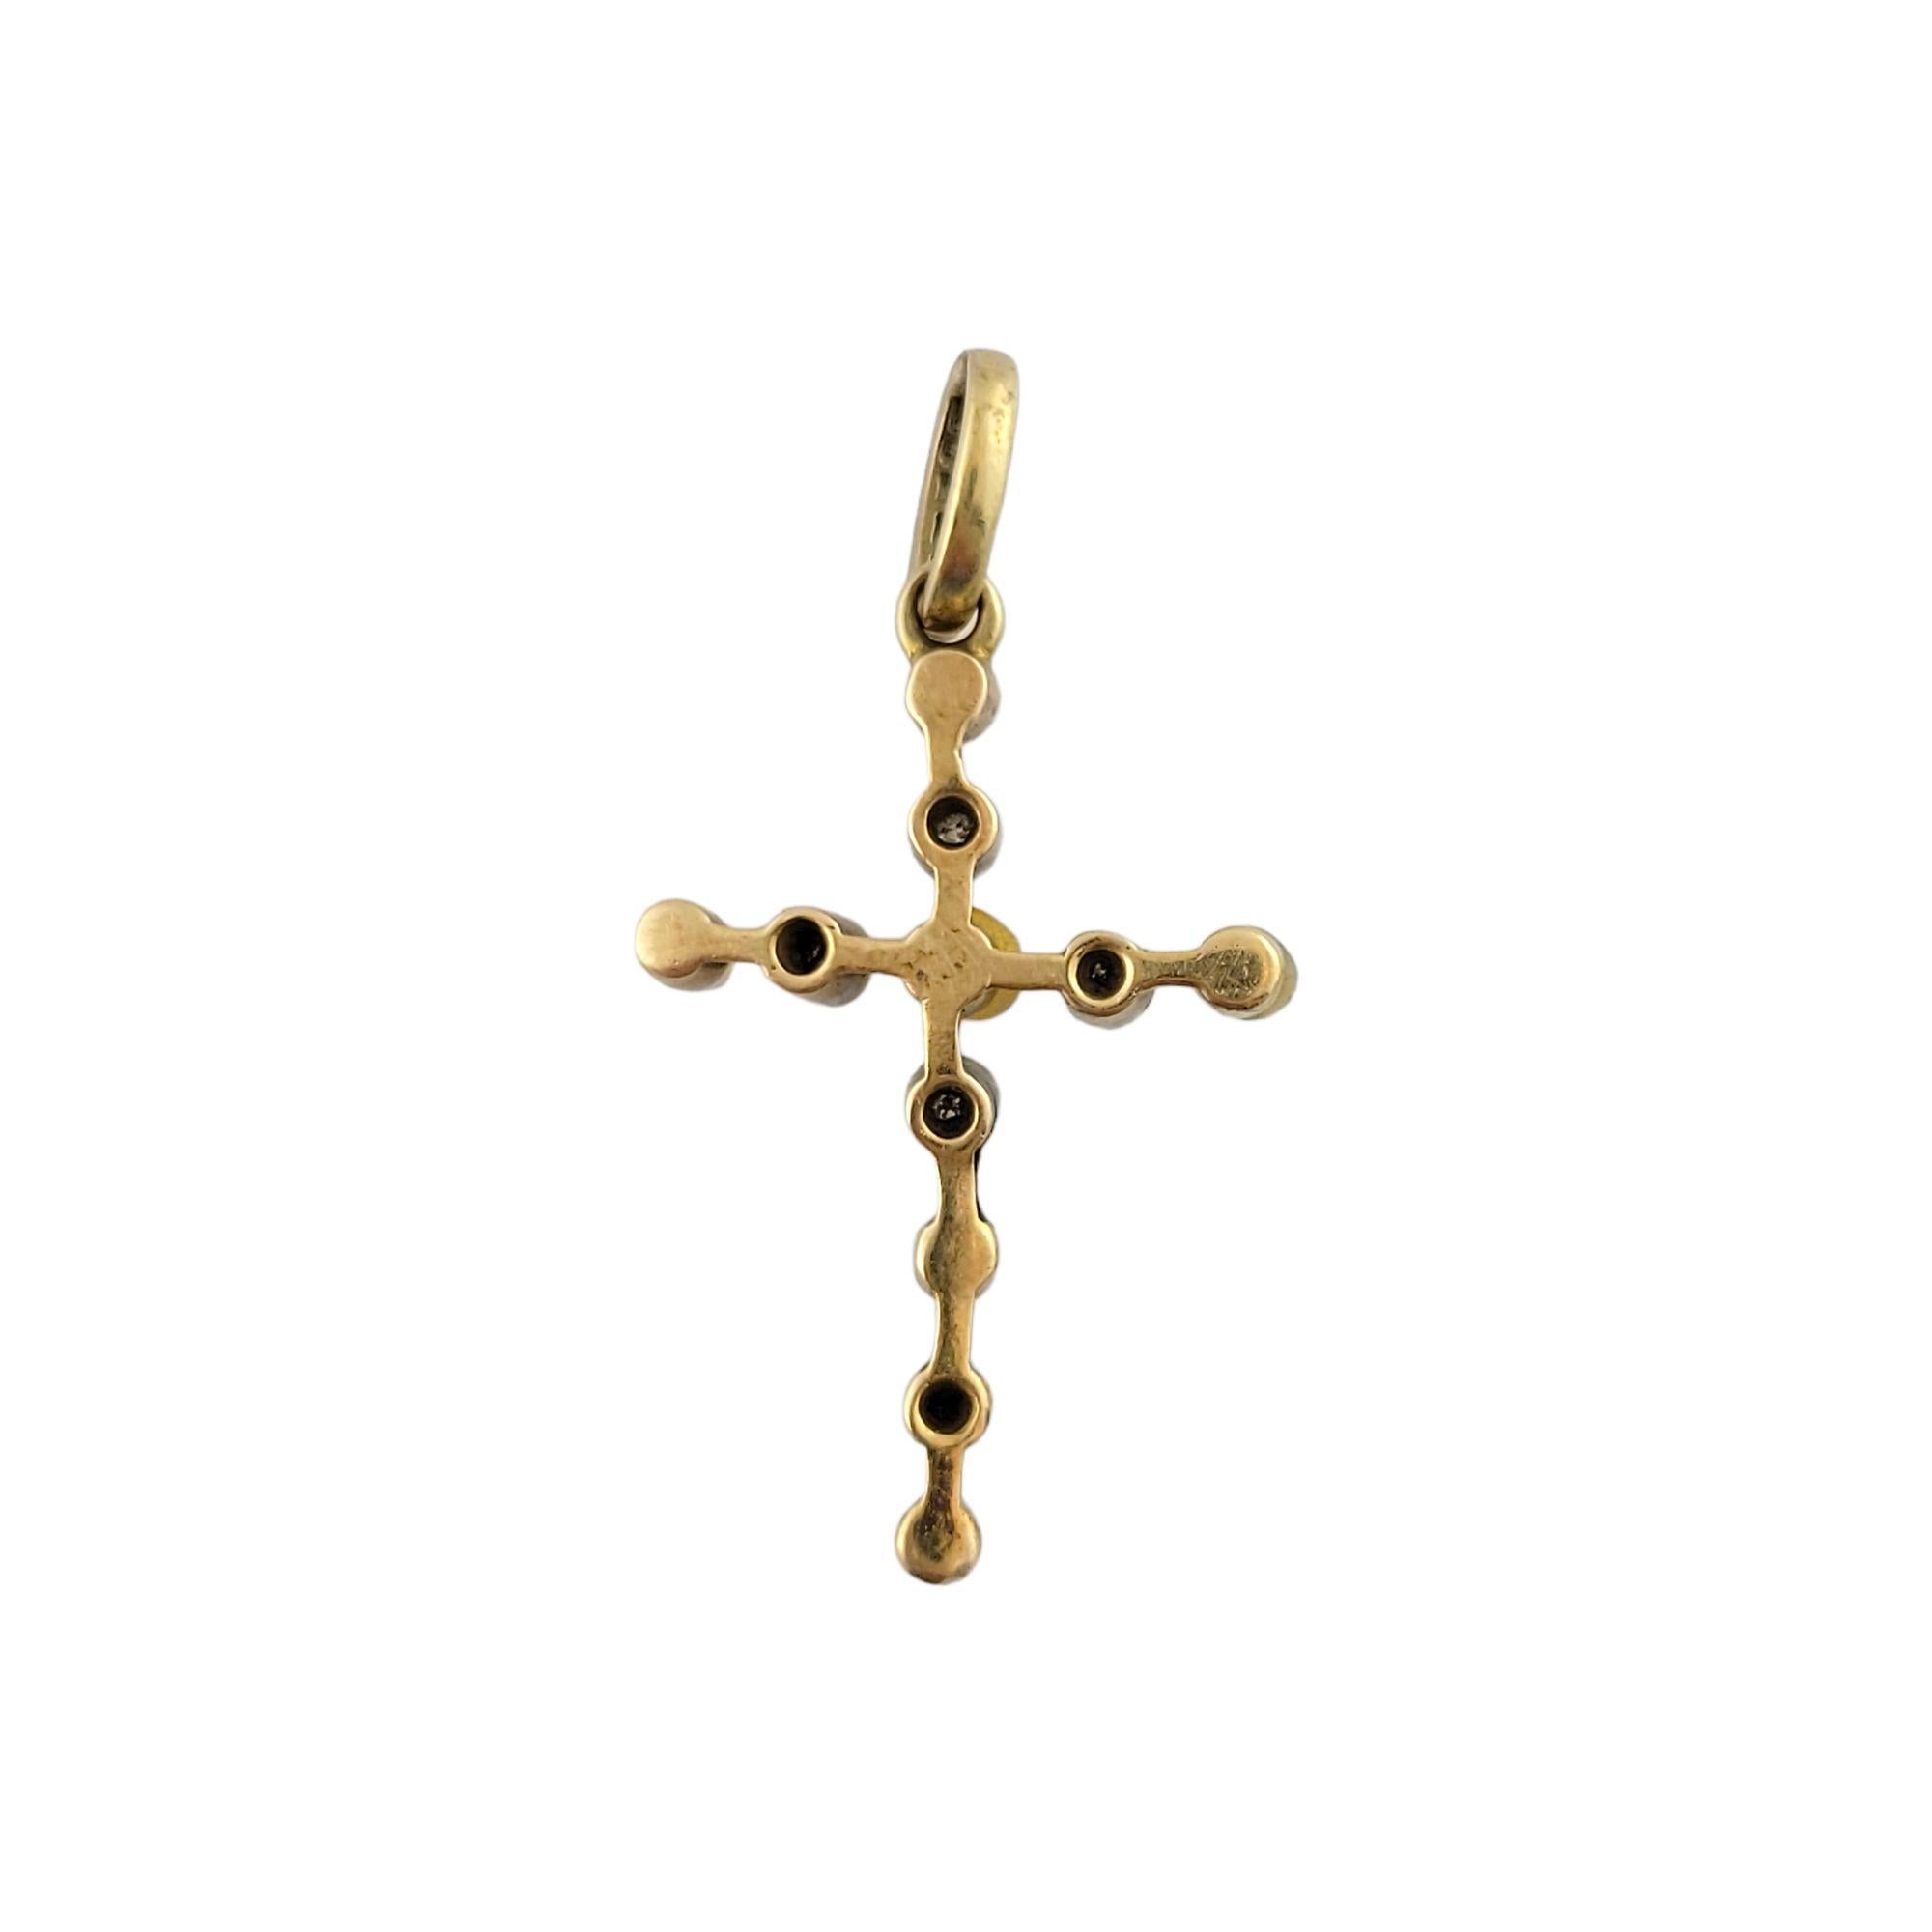 Vintage 14K Yellow Gold Antique Pearl & Diamond Cross Pendant

6 beautiful pearls paired with 10 sparkling rose cut diamonds set in a 14K yellow gold cross pendant!

Pearl sizes: 2-3mm

Approximate total diamond weight: 0.25 cts

Diamond clarity: